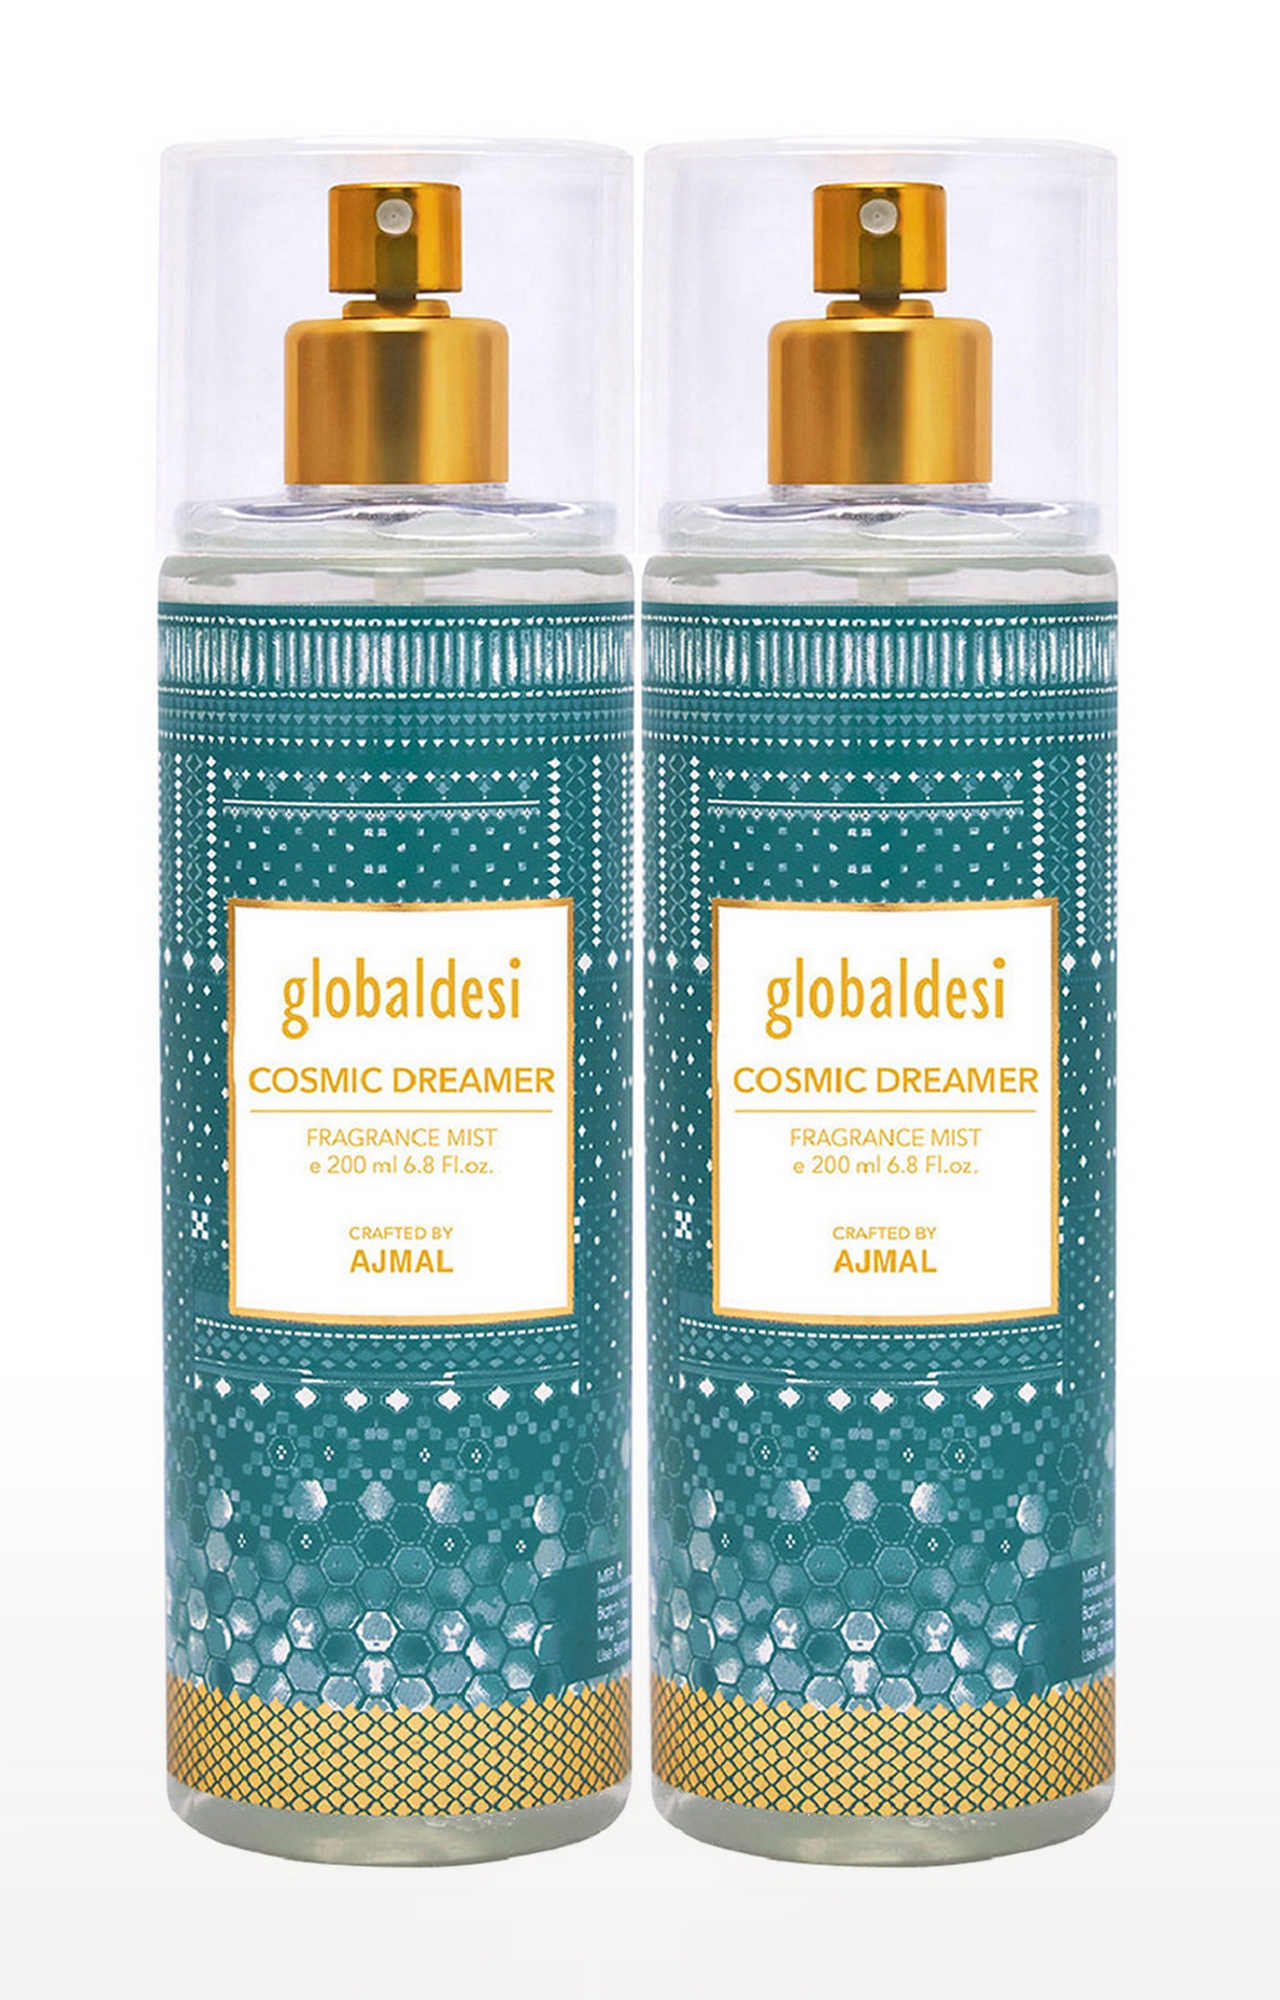 Global Desi Cosmic Dreamer Pack of 2 Body Mist 200ML each Long Lasting Scent Spray Gift For Women Perfume Crafted by Ajmal FREE